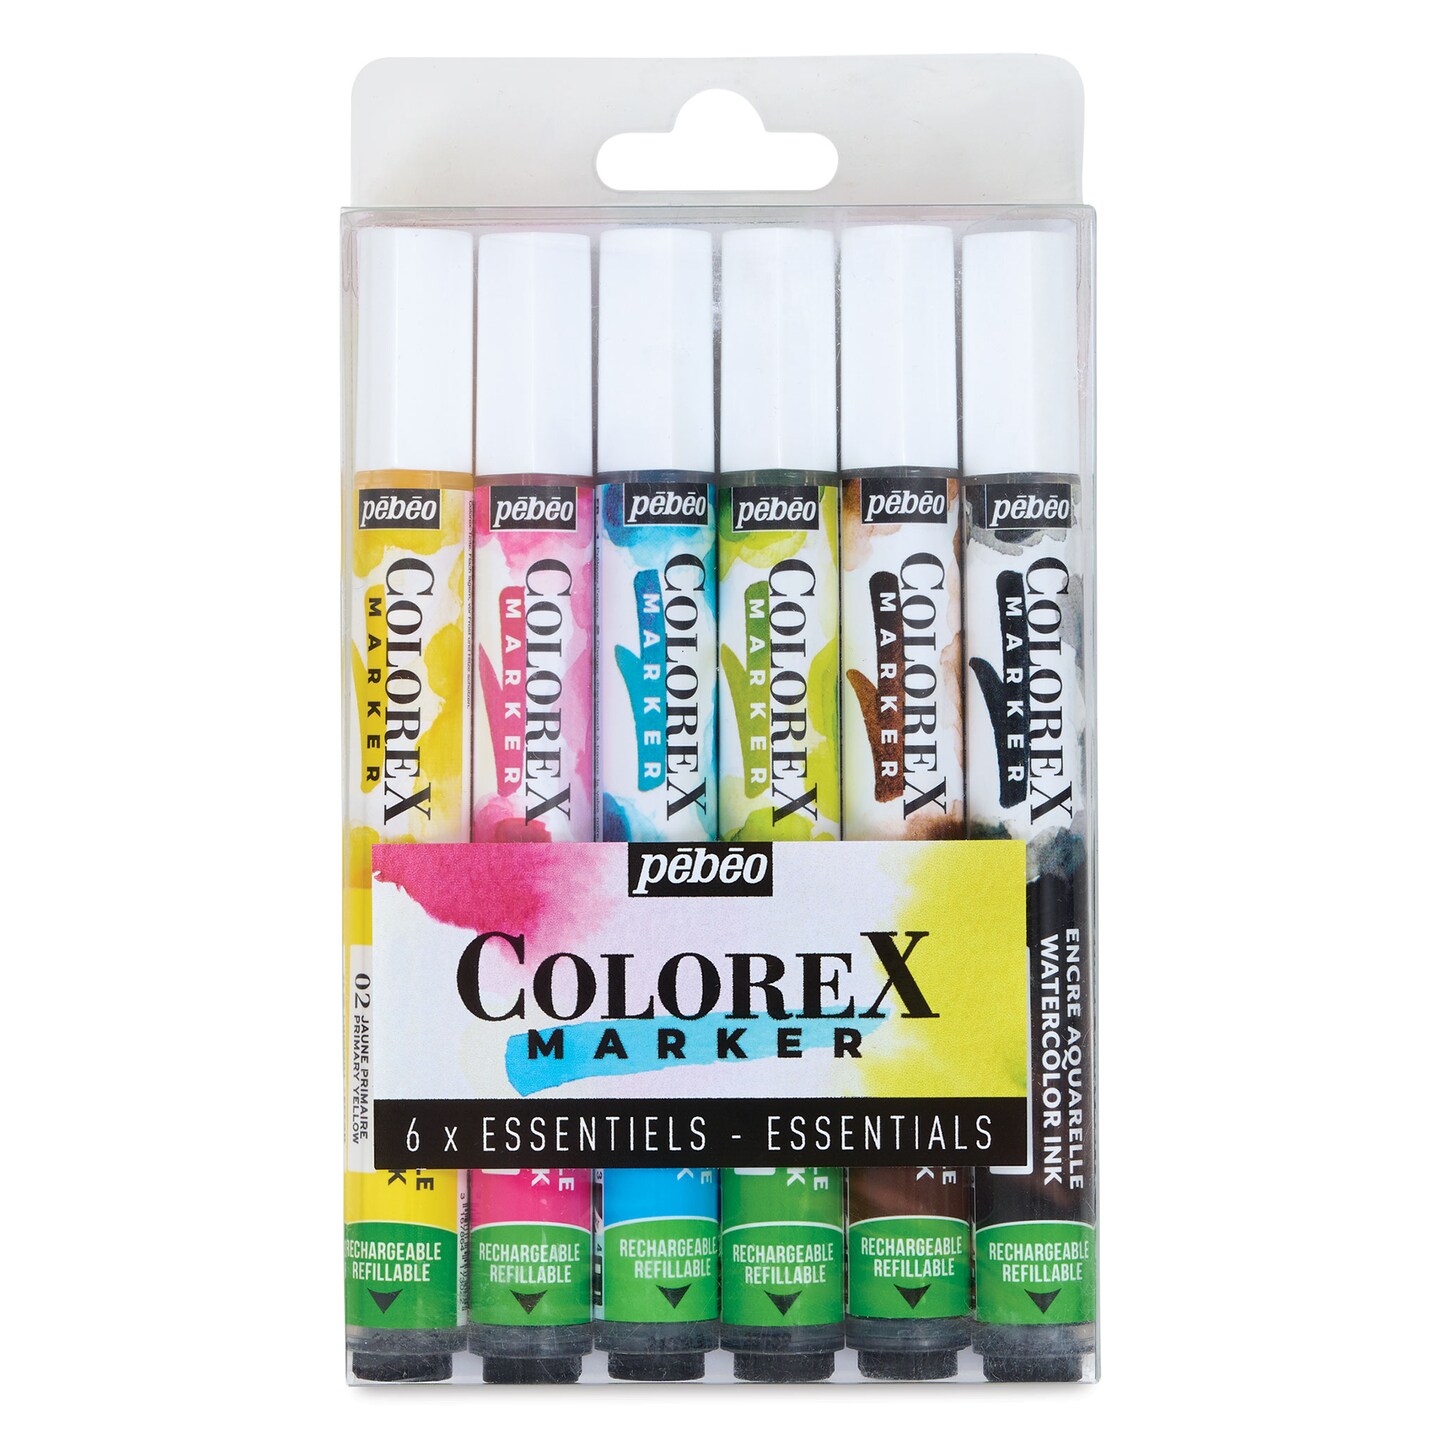 Pebeo Colorex Refillable Markers - Set of 6, Essentials